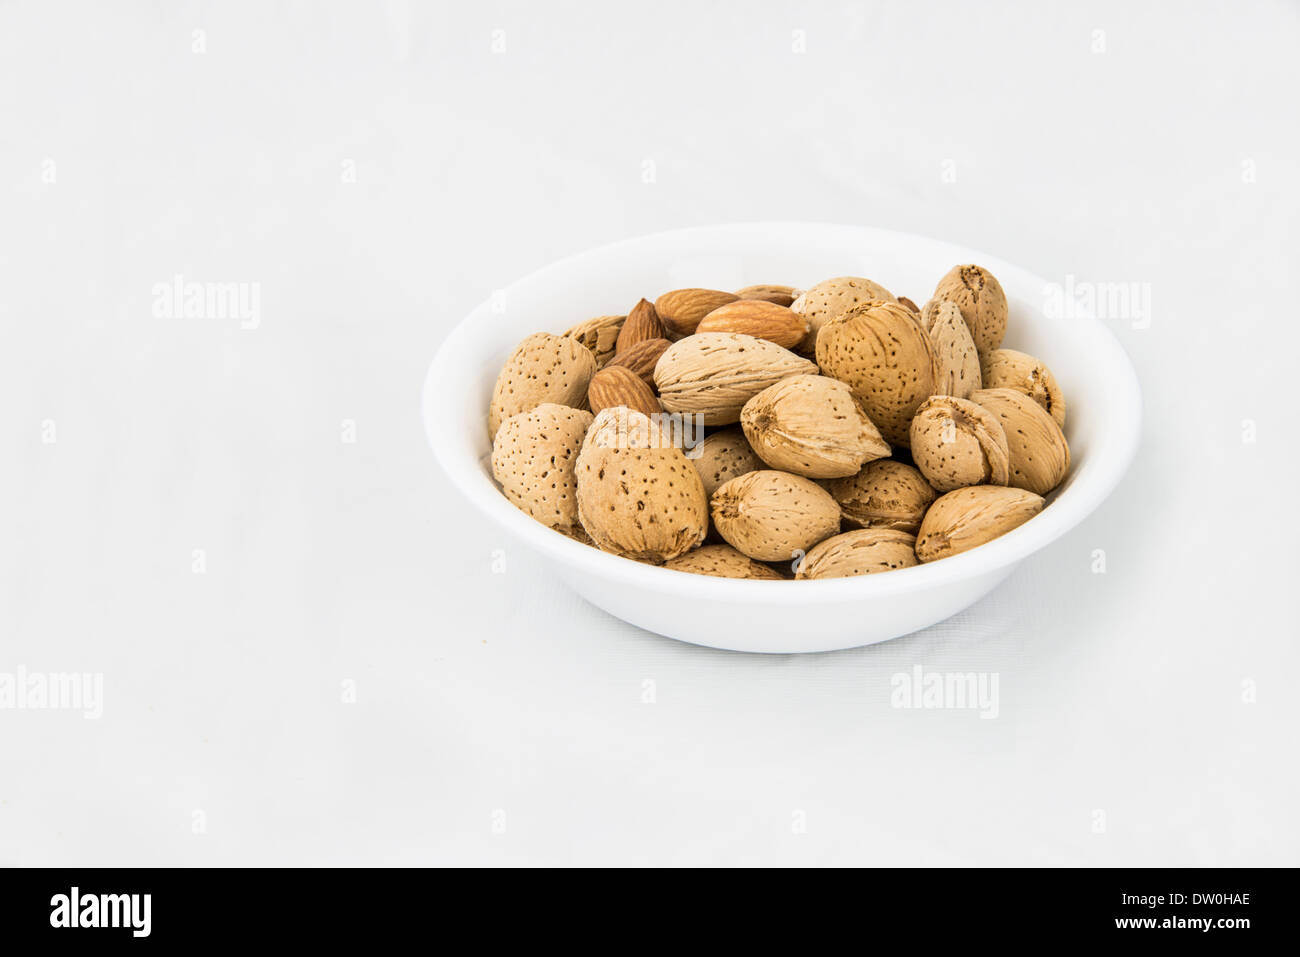 A small bowl of shelled and unshelled almonds, isolated on white. Stock Photo